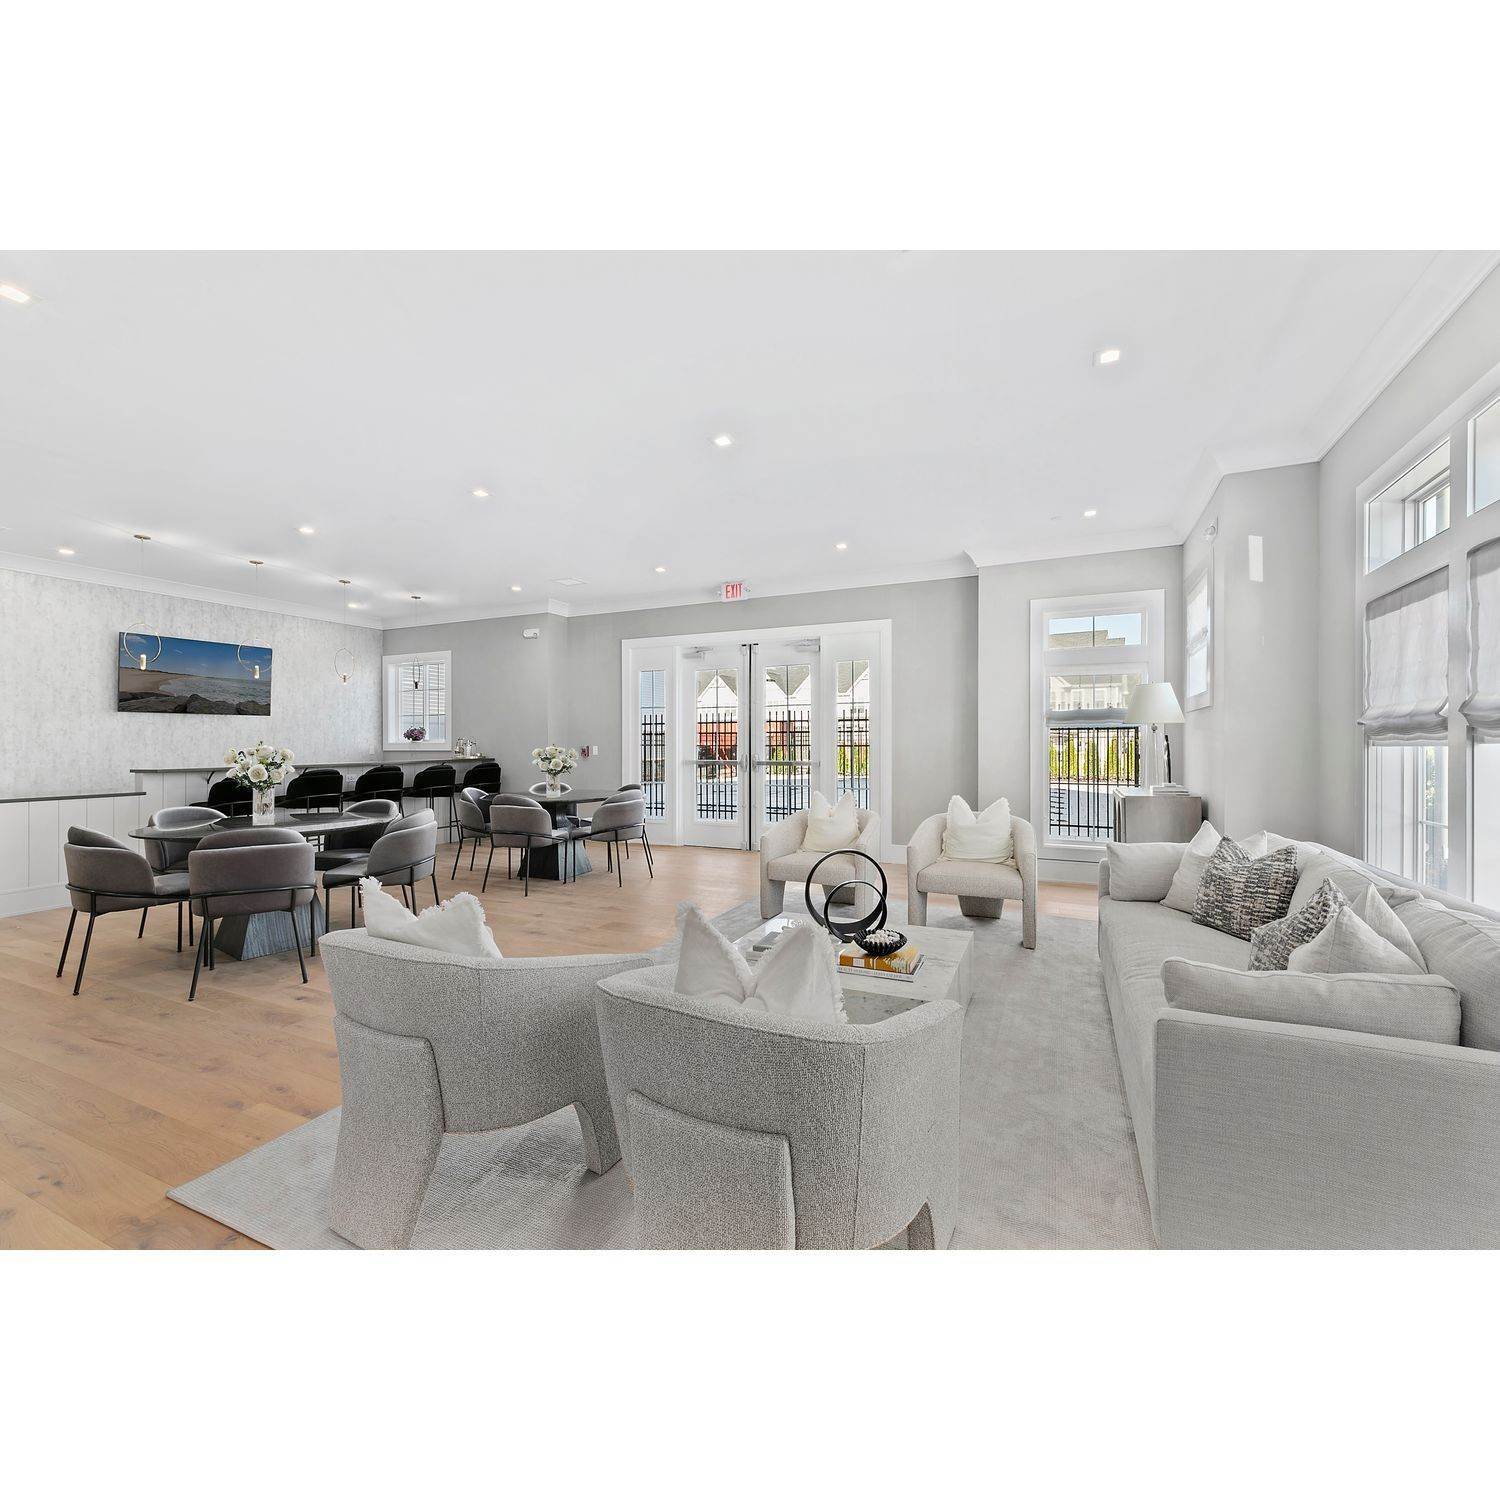 31. Meadowbrook Pointe East Meadow xây dựng tại 123 Merrick Avenue, East Meadow, NY 11554